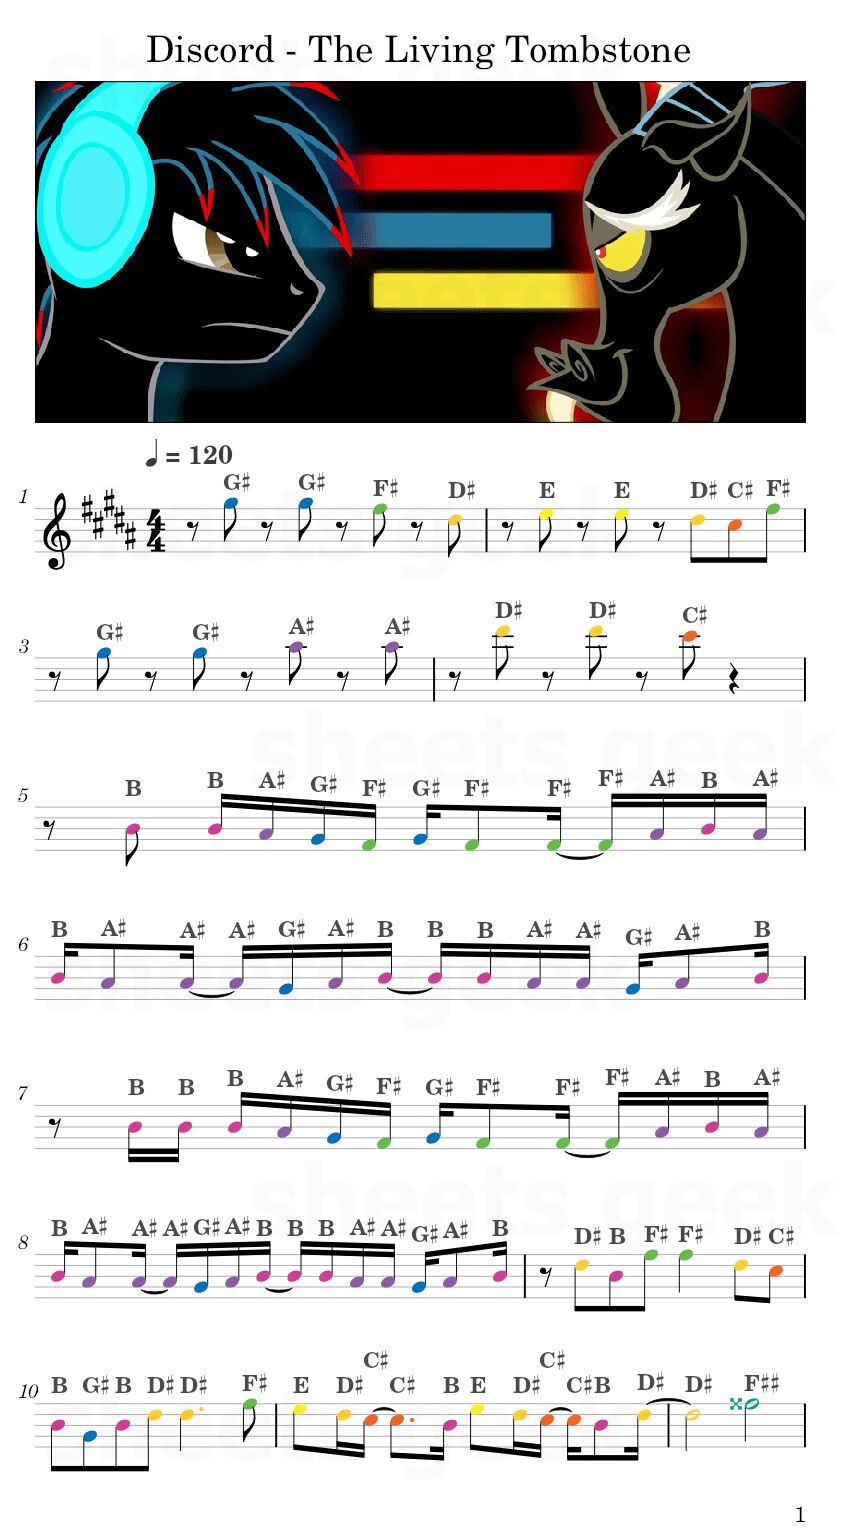 Discord - The Living Tombstone (My Little Pony: Friendship Is Magic) Easy Sheet Music Free for piano, keyboard, flute, violin, sax, cello page 1